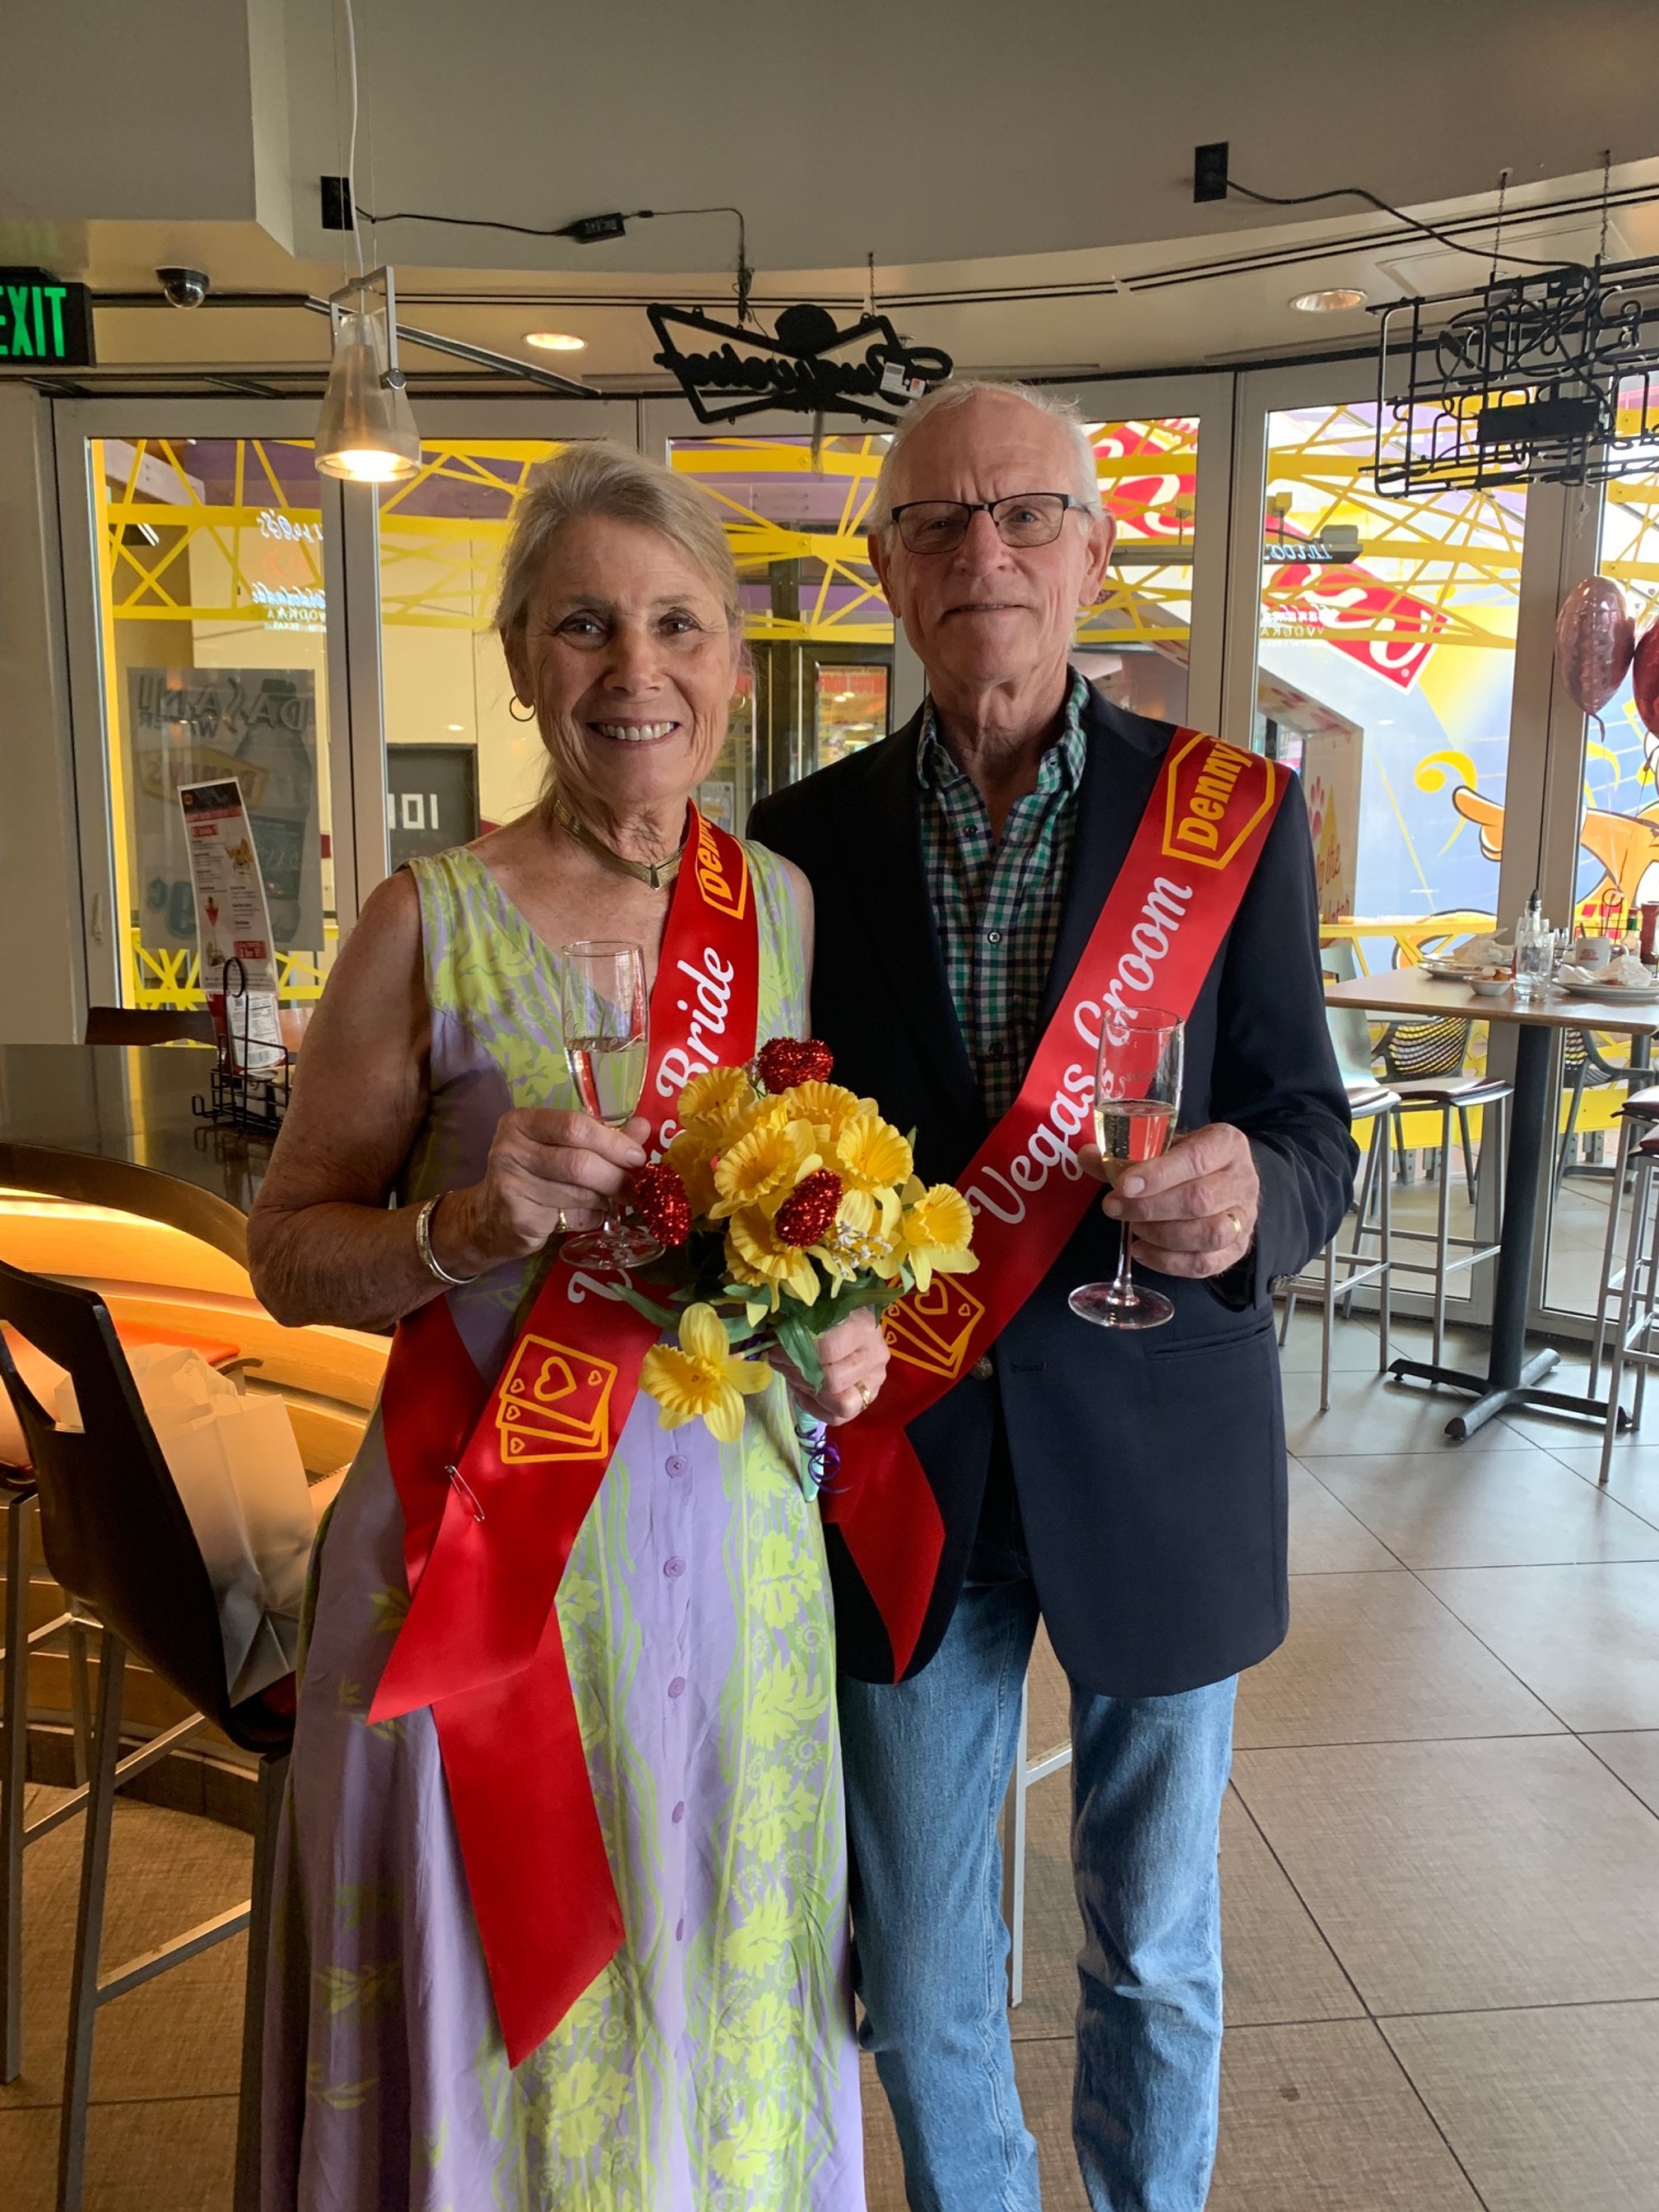 Get married at Denny's in Downtown Las Vegas for free this Valentines Day